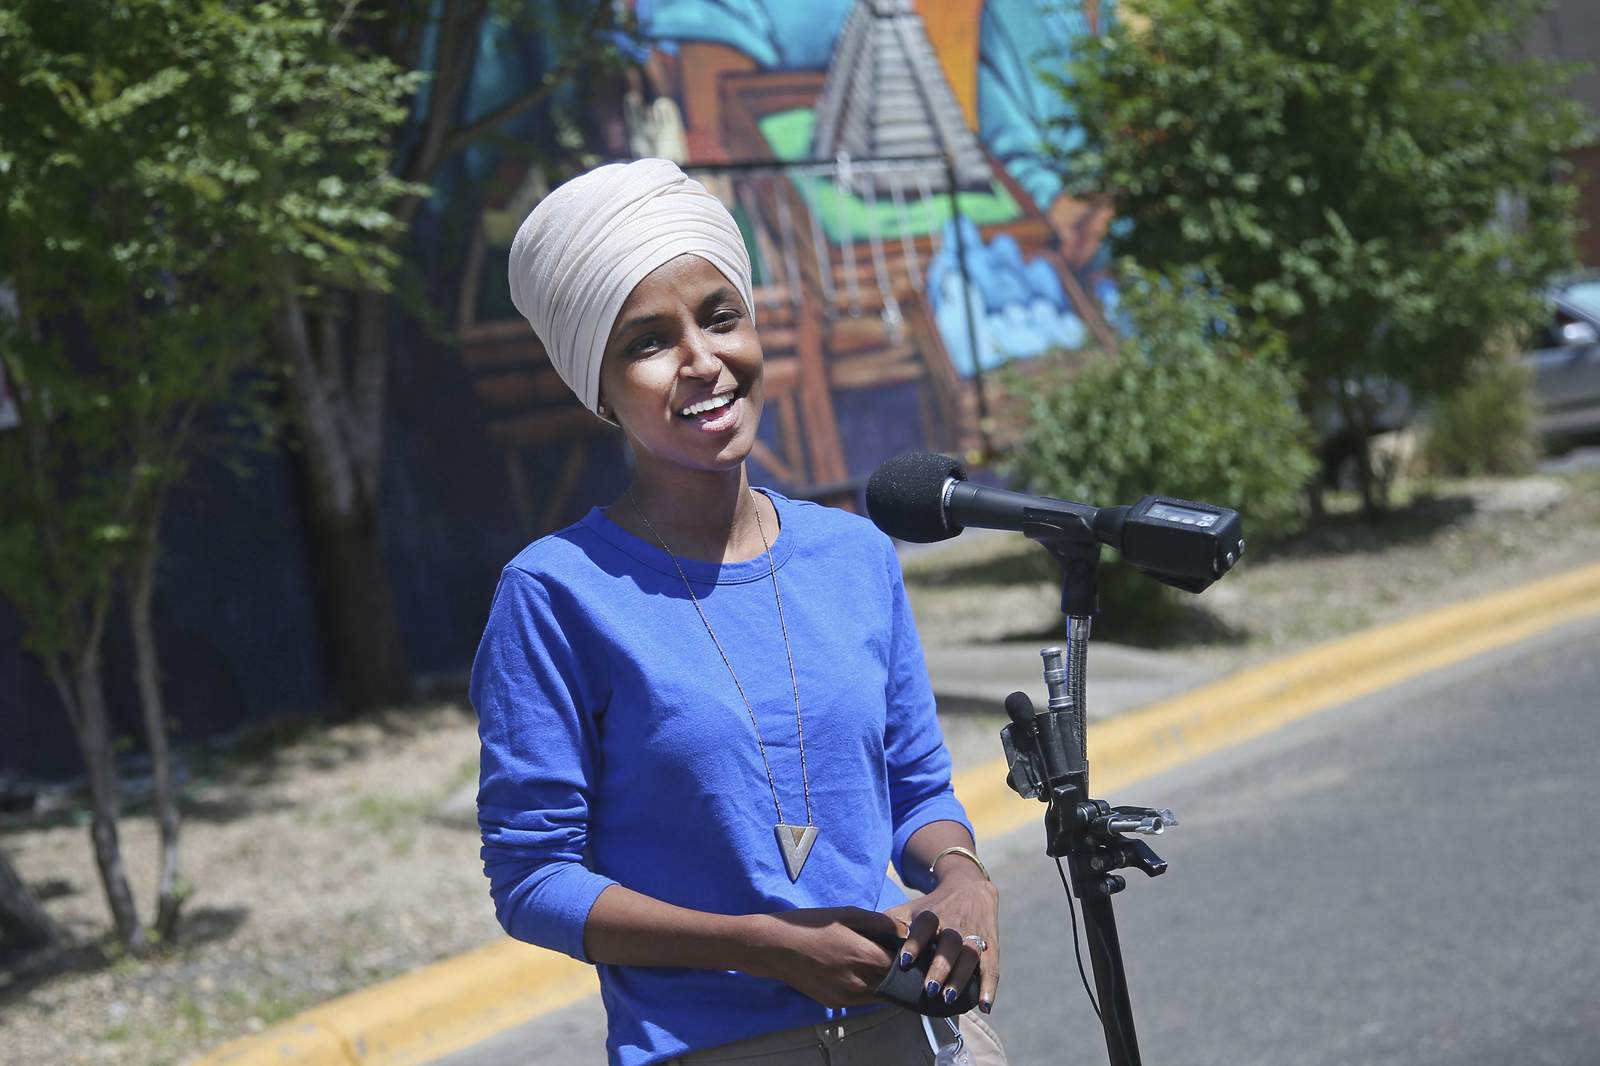 Minnesota’s Omar holds off well-funded primary challenger